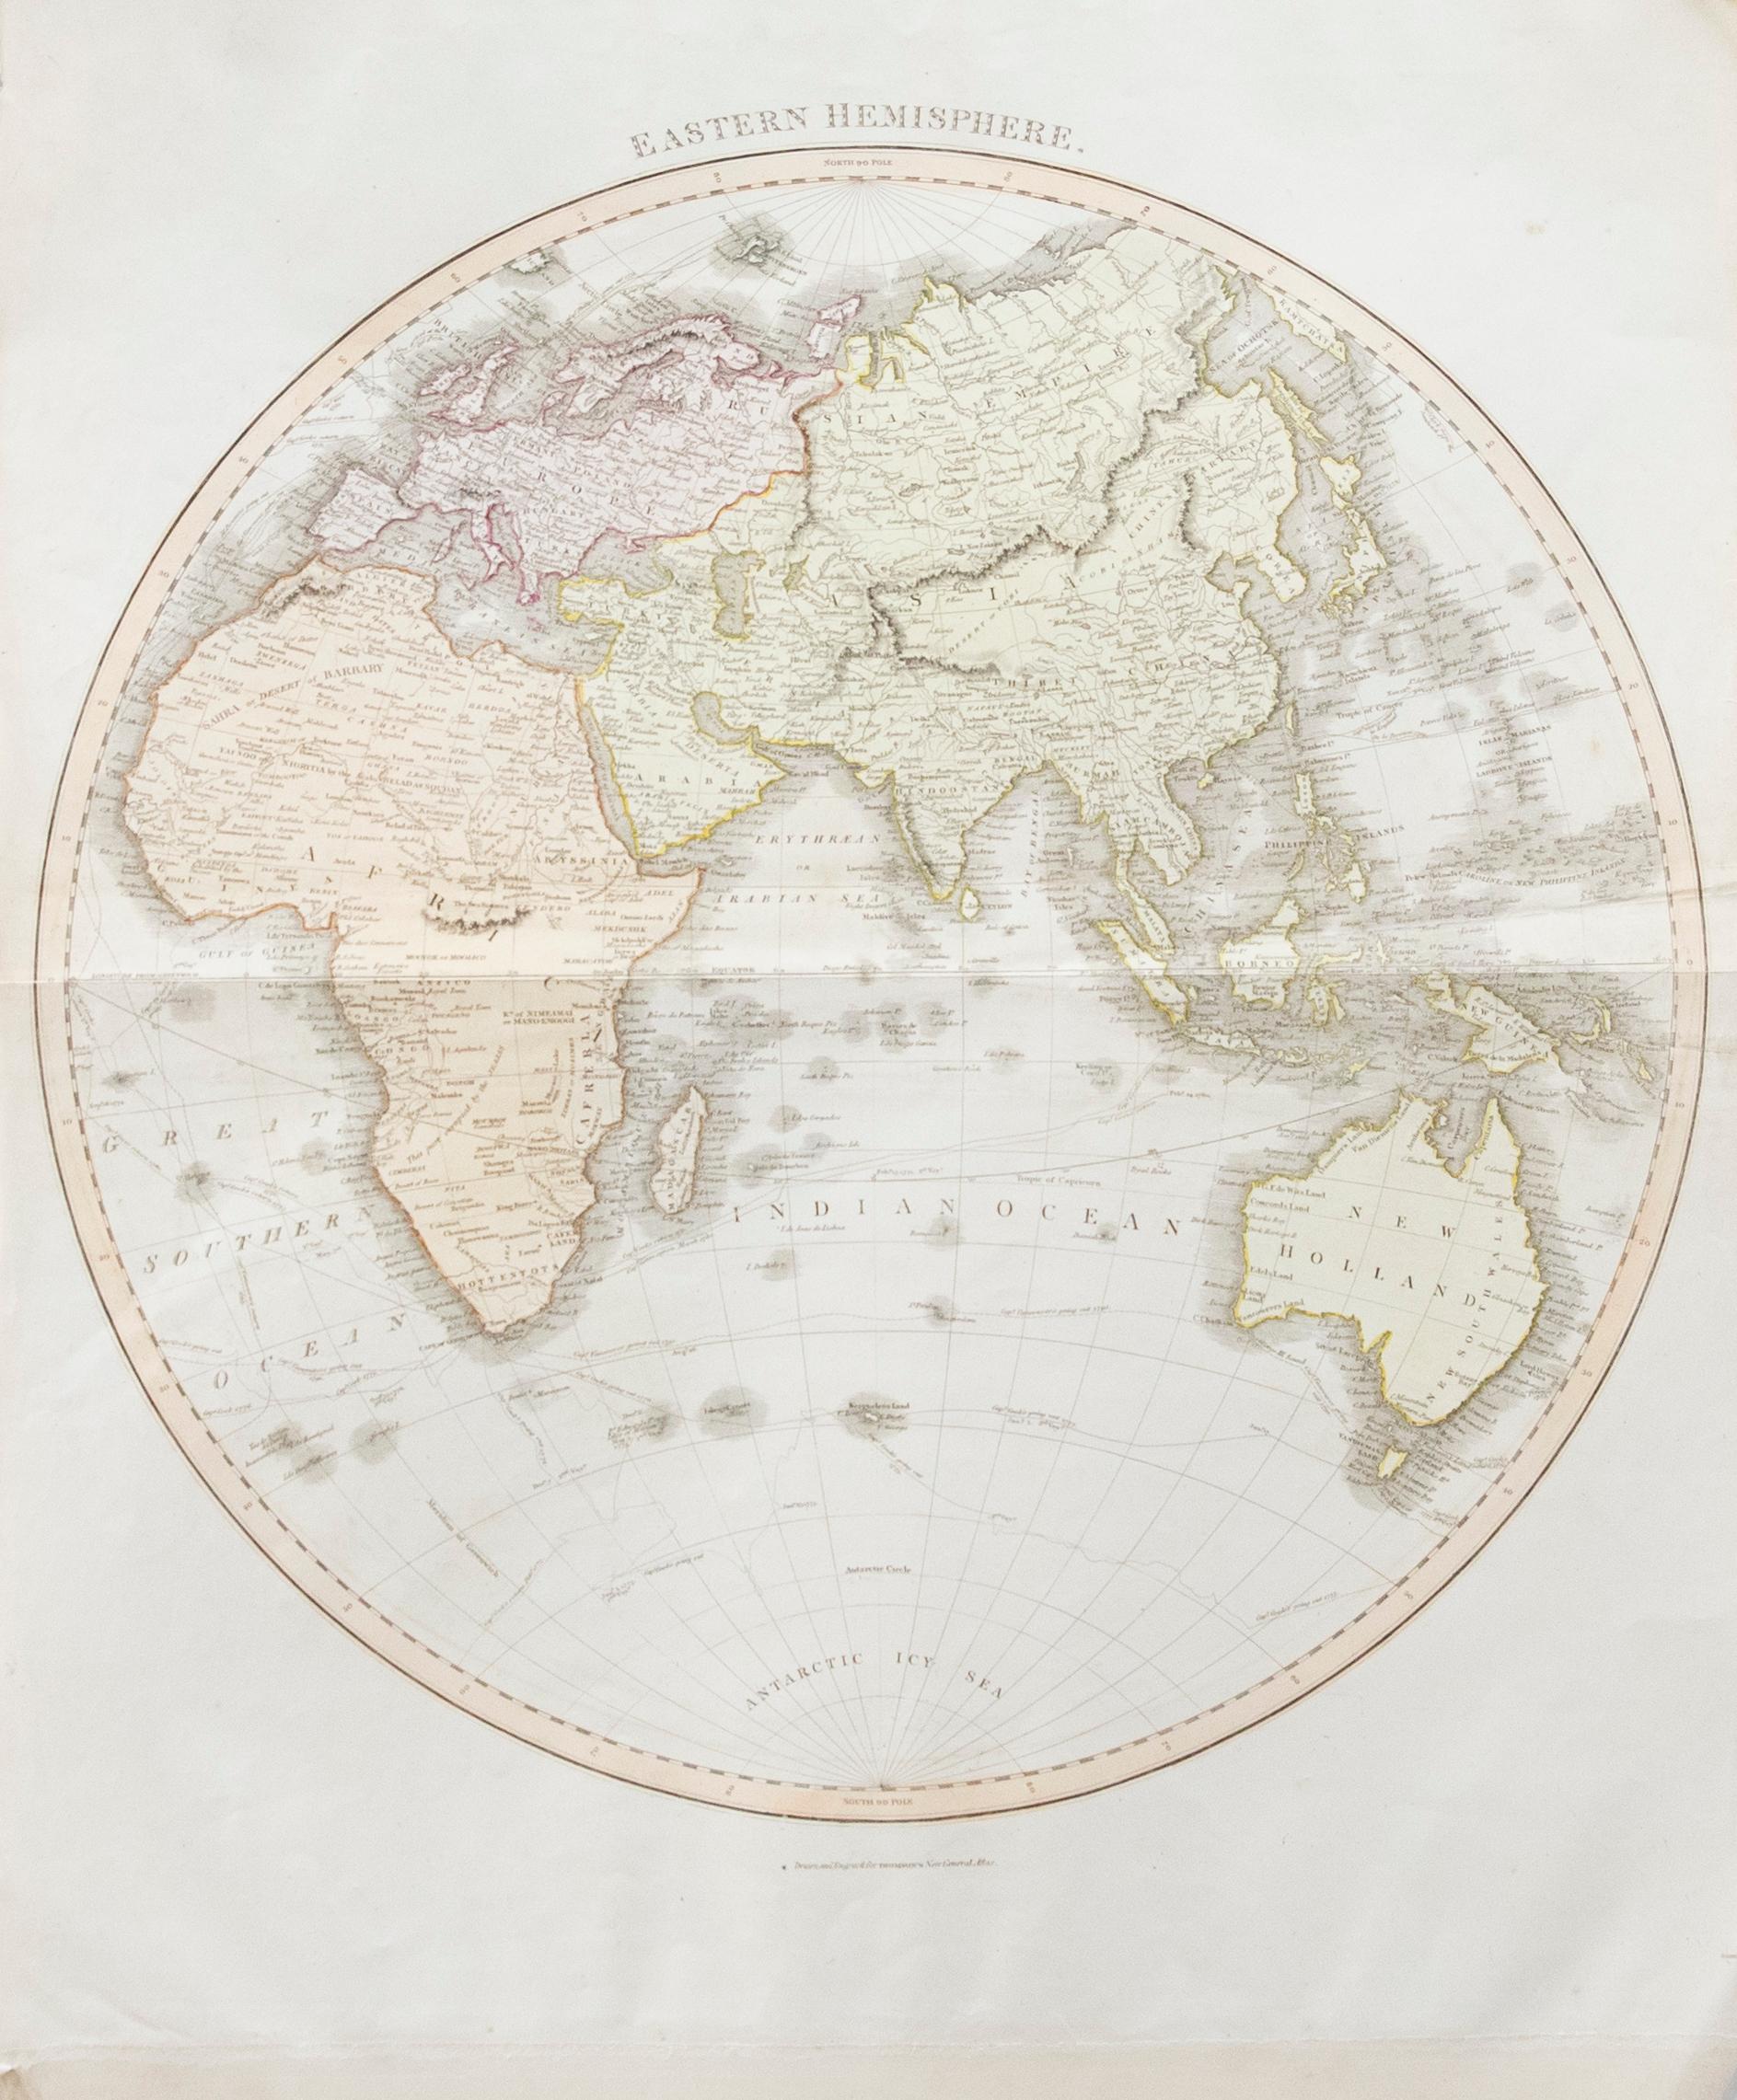 A fine engraved map of the Eastern Hemisphere of Earth, from the second edition of John Thomson's 'New General Atlas' published in 1830. On paper.